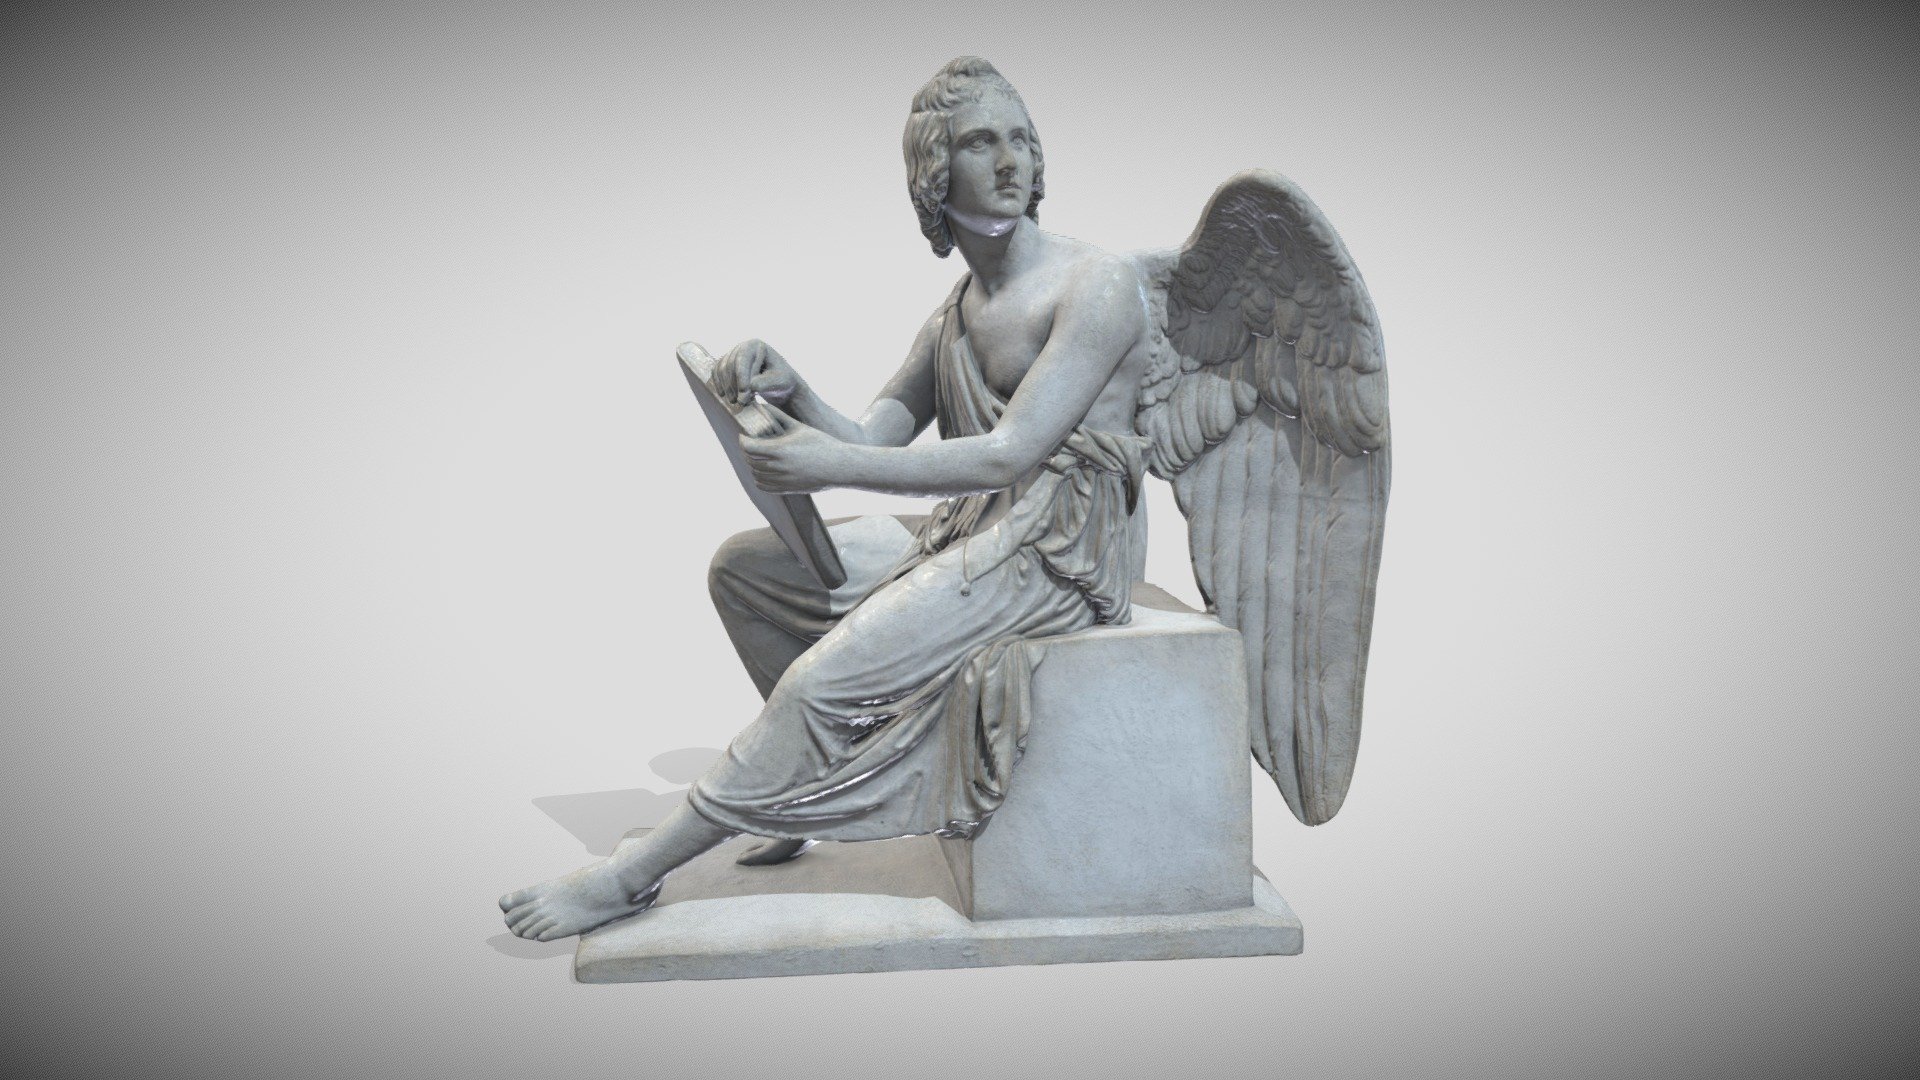 Original very nice 3D Scan from the Thorvaldsens Museum

https://www.myminifactory.com/object/3d-print-angel-110235

here the Painted Gaming Version LR....

One Material 4k PBR Metalness

All Quad - Angel Statue - Angely - Buy Royalty Free 3D model by Francesco Coldesina (@topfrank2013) 3d model